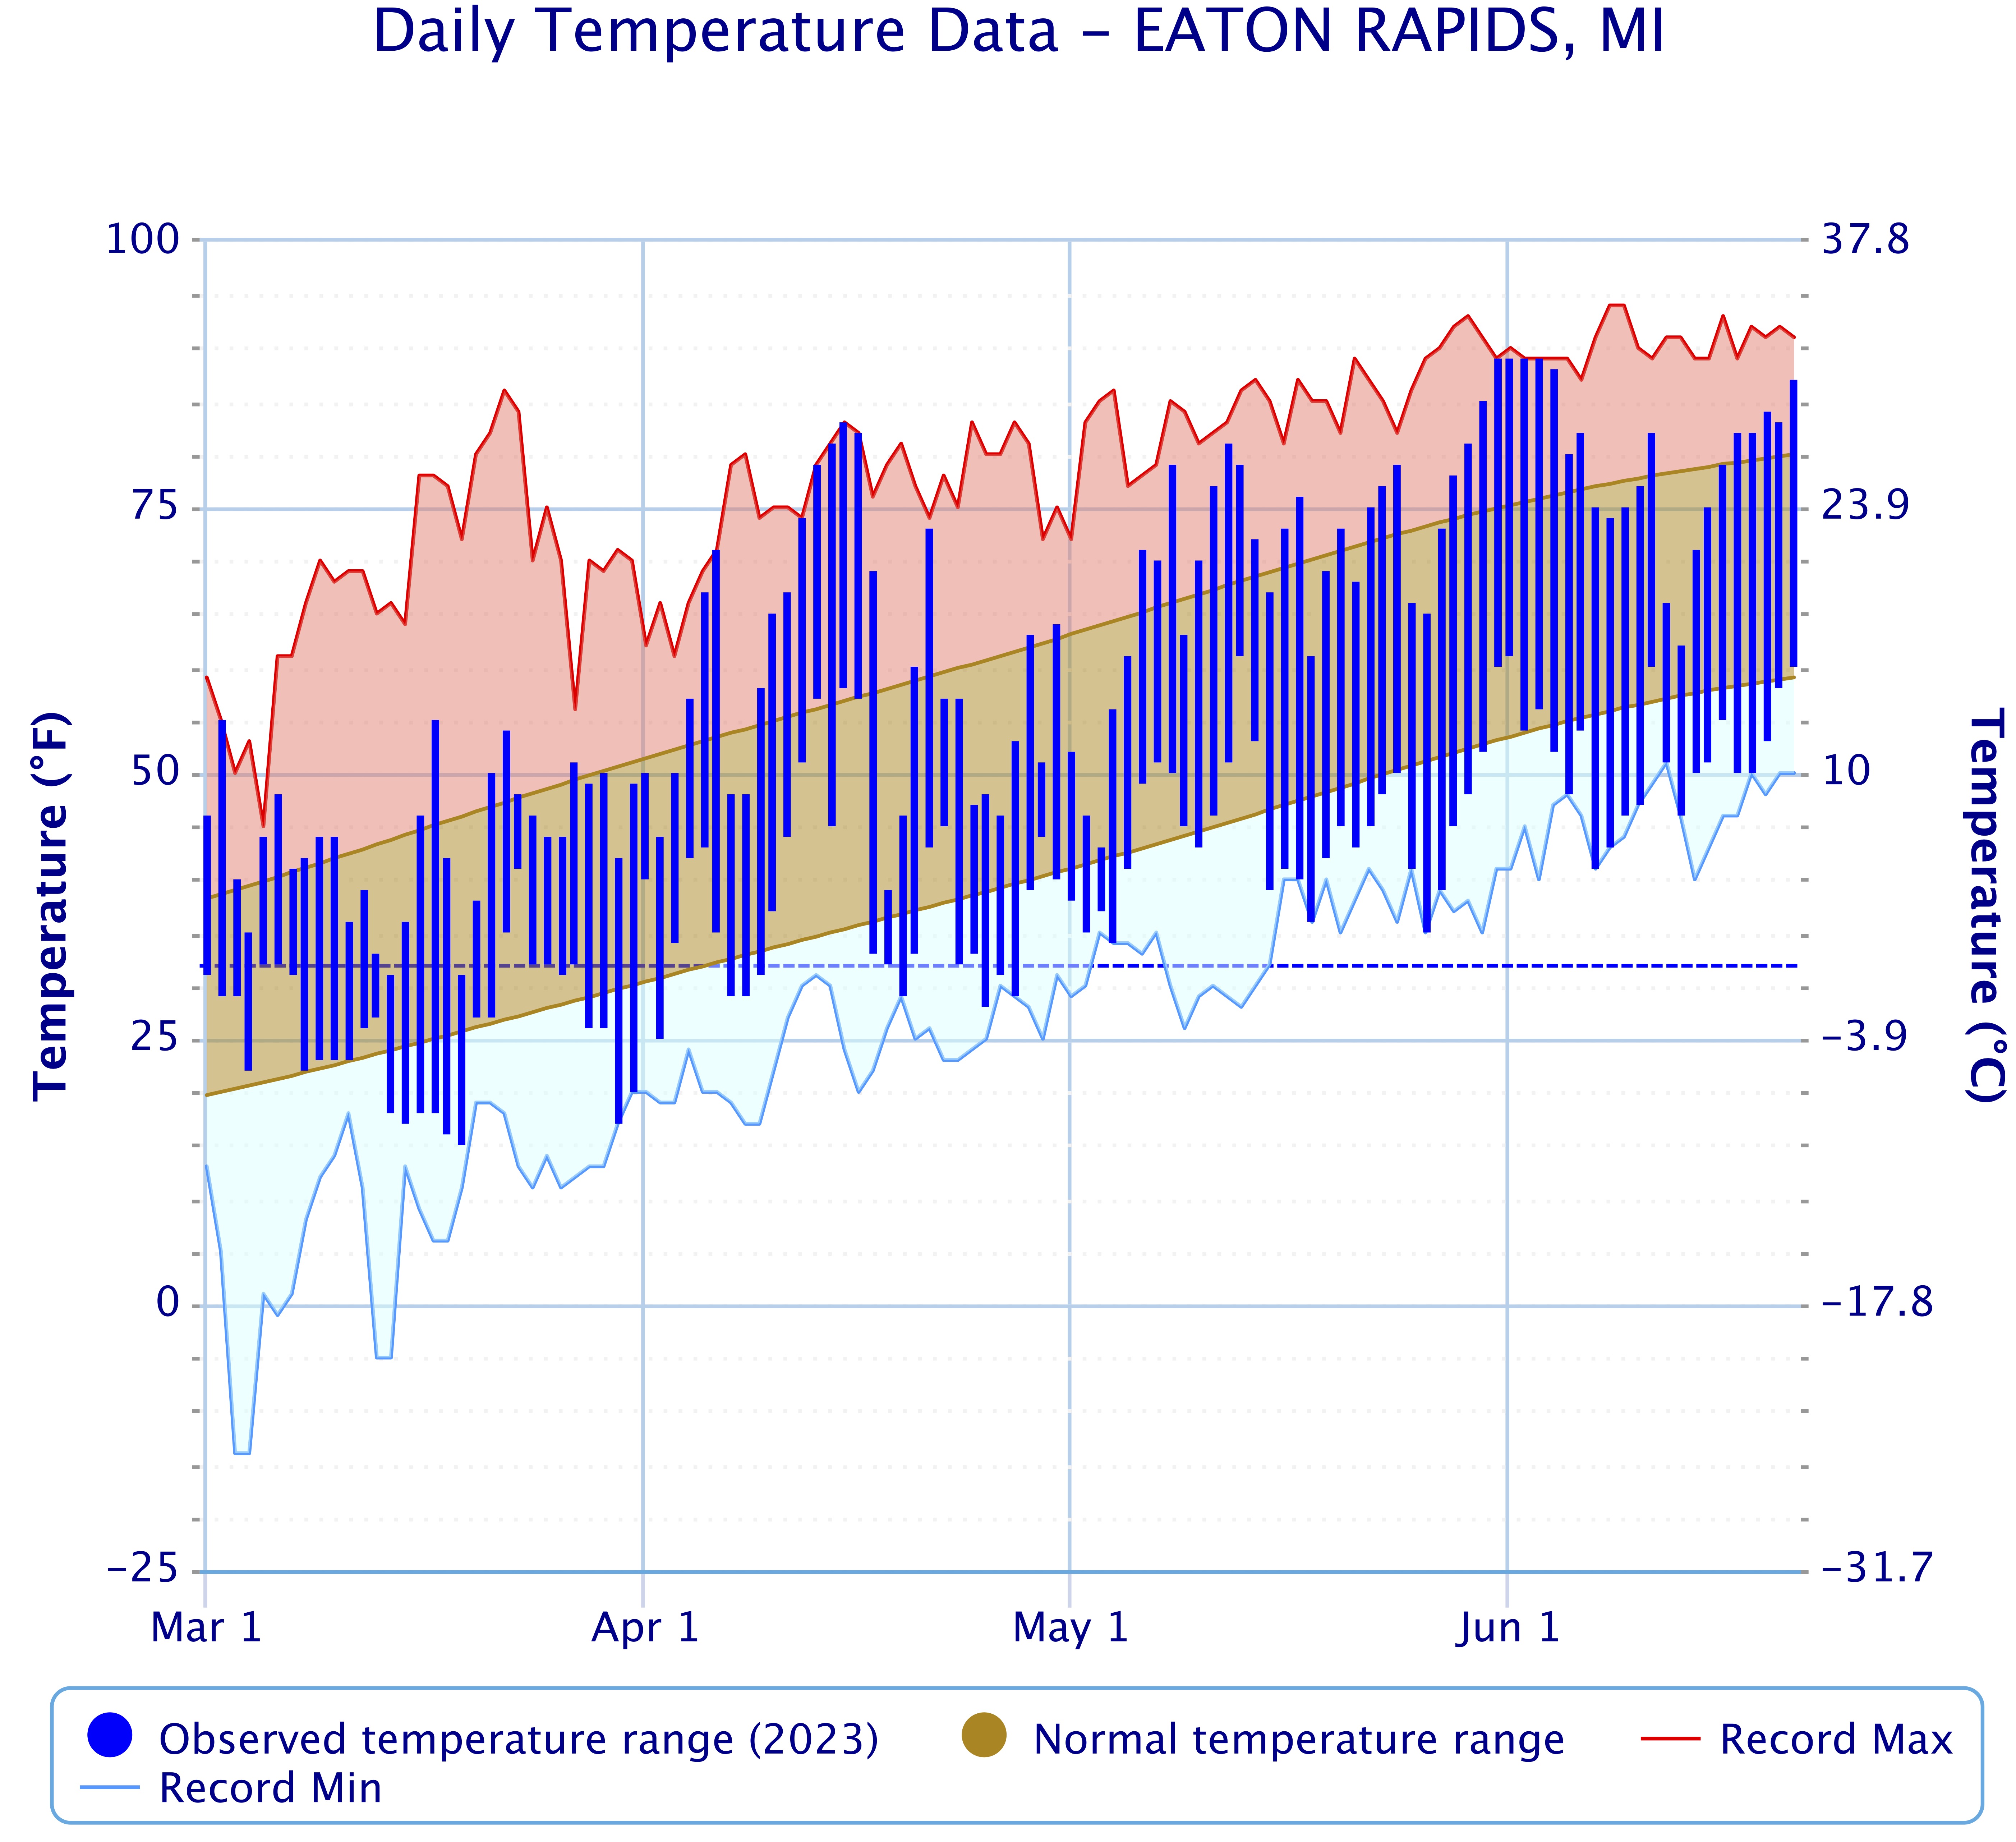 Daily temperature chart from March 1-June 21, 2023 with average low and high temperatures.